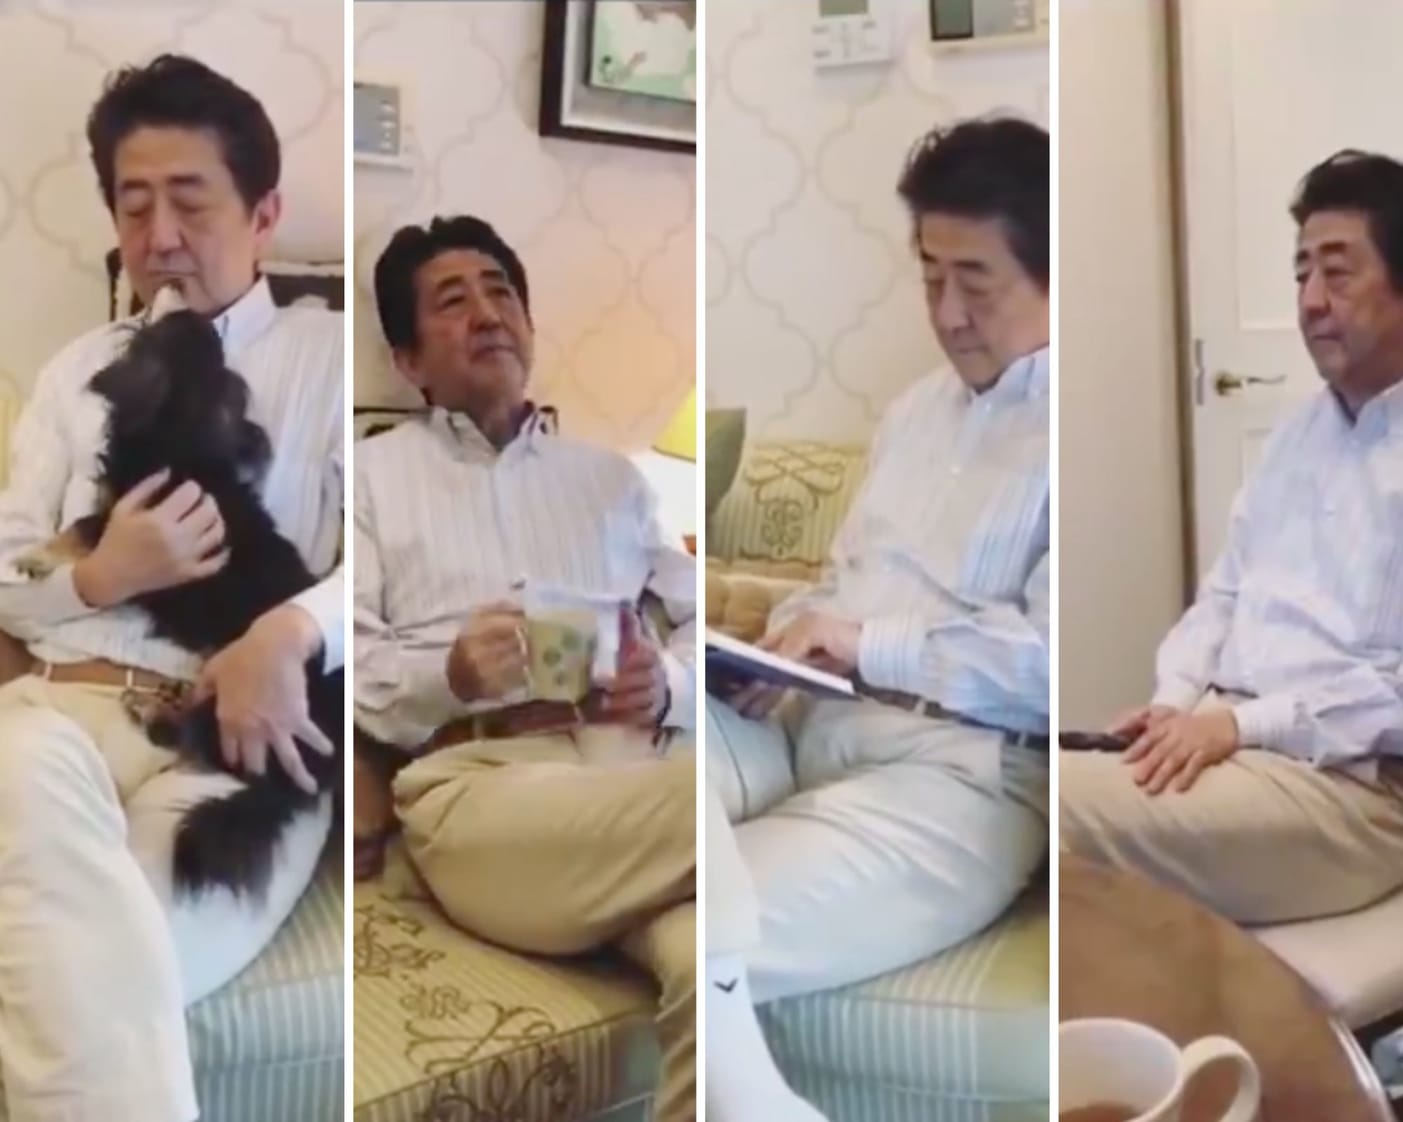 “Who Do You Think You Are?”:  PM Shinzo Abe’s #StayHome Viral Video Angers Japan’s Social Media